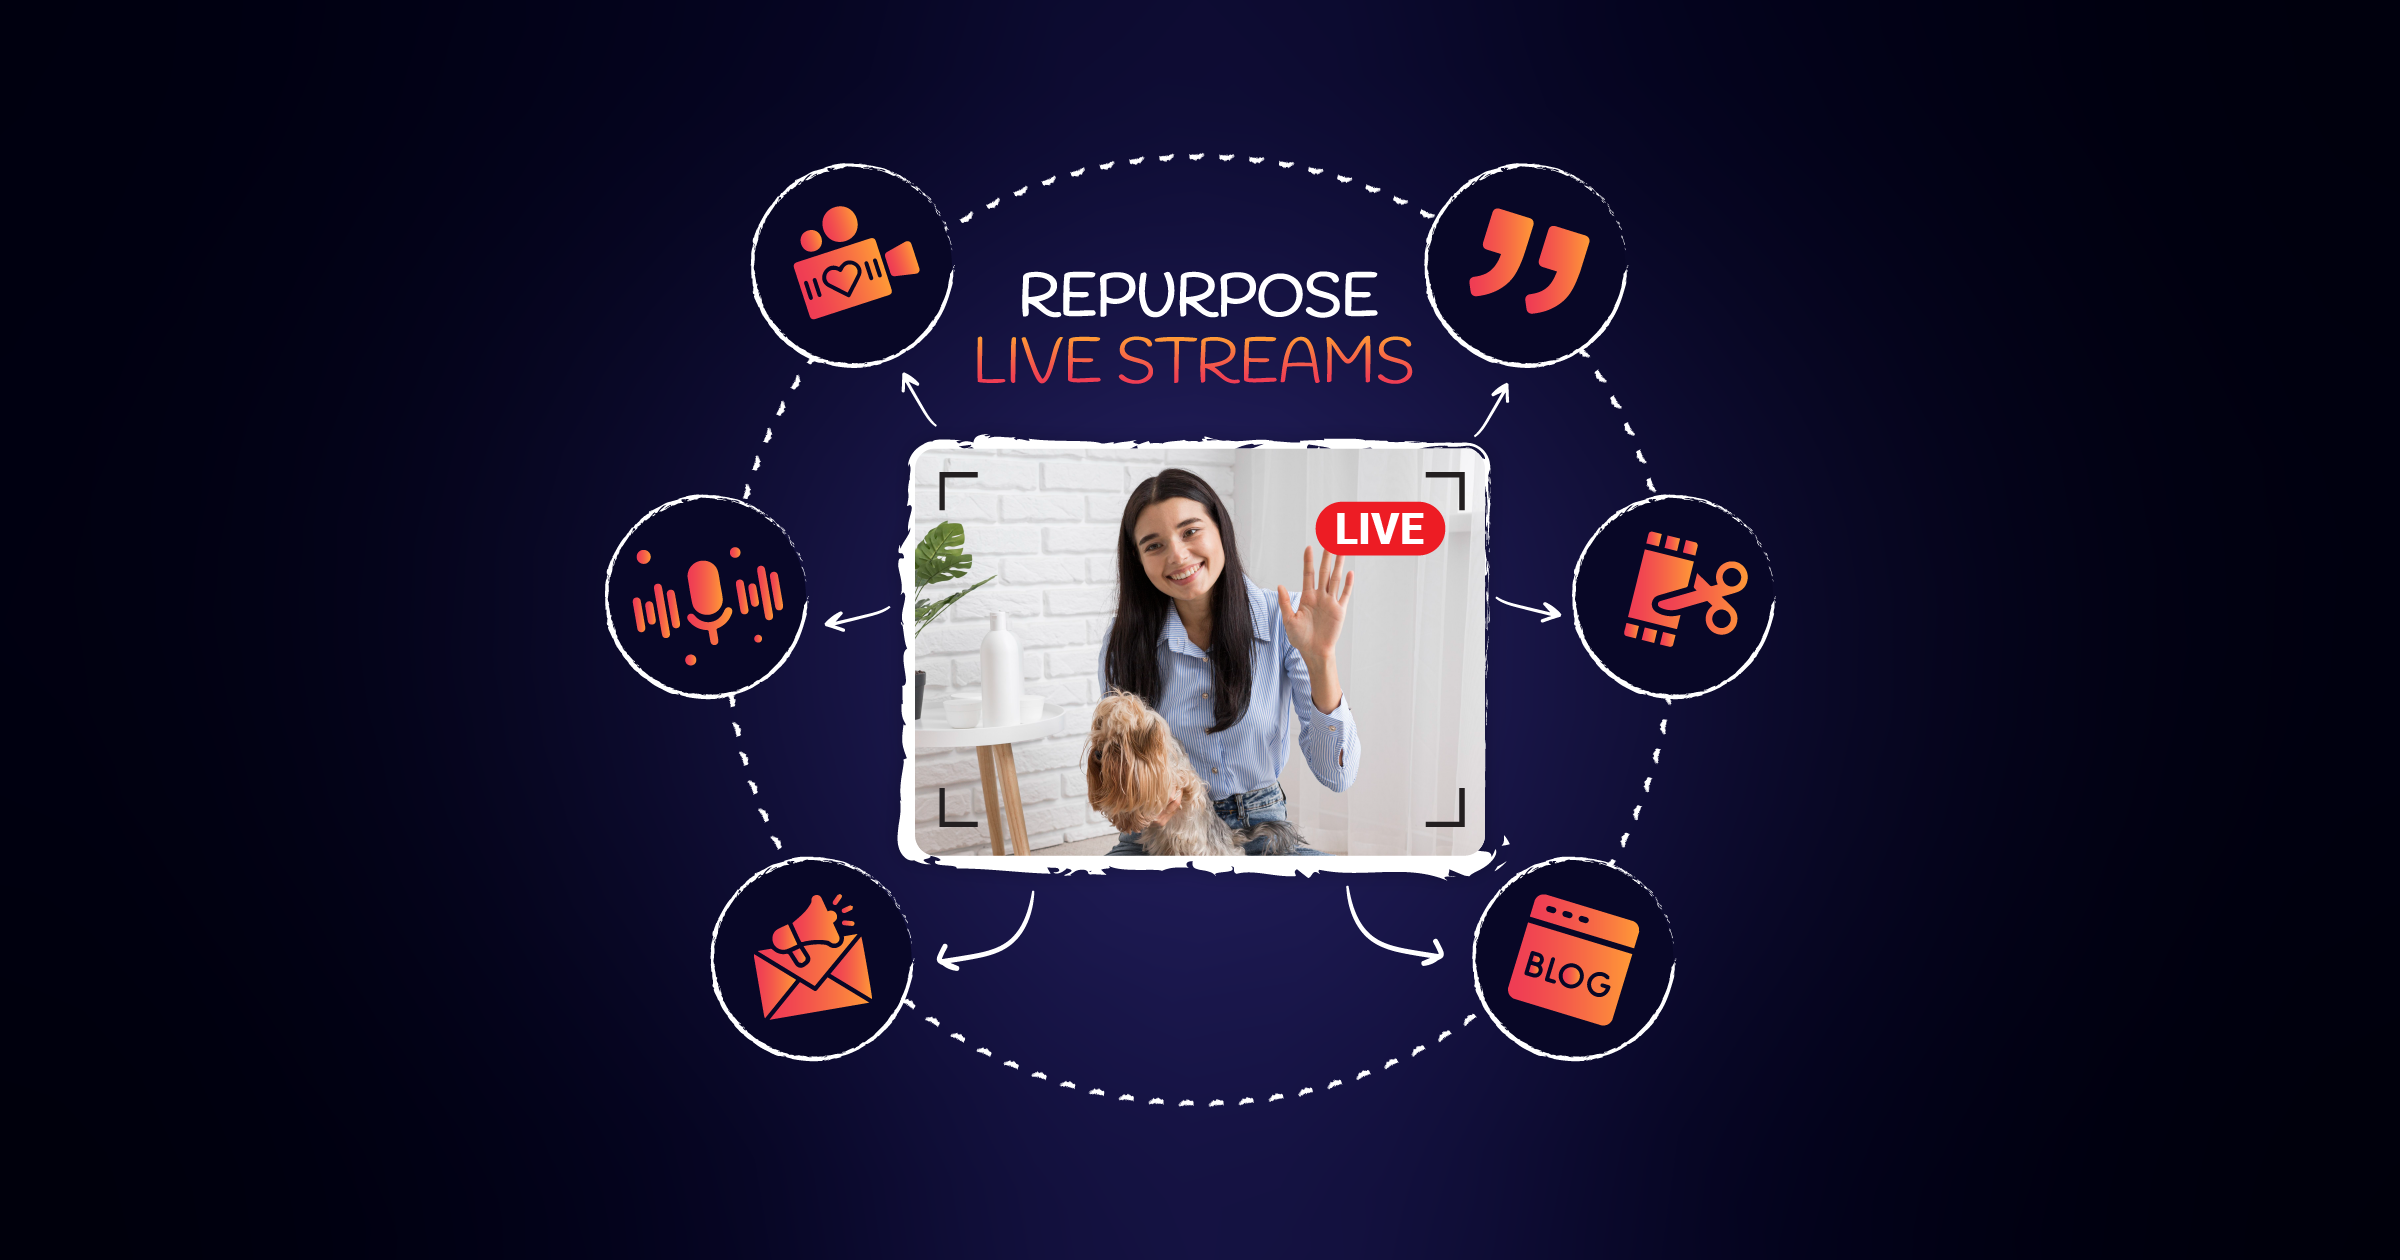 Repurpose your live streams old content